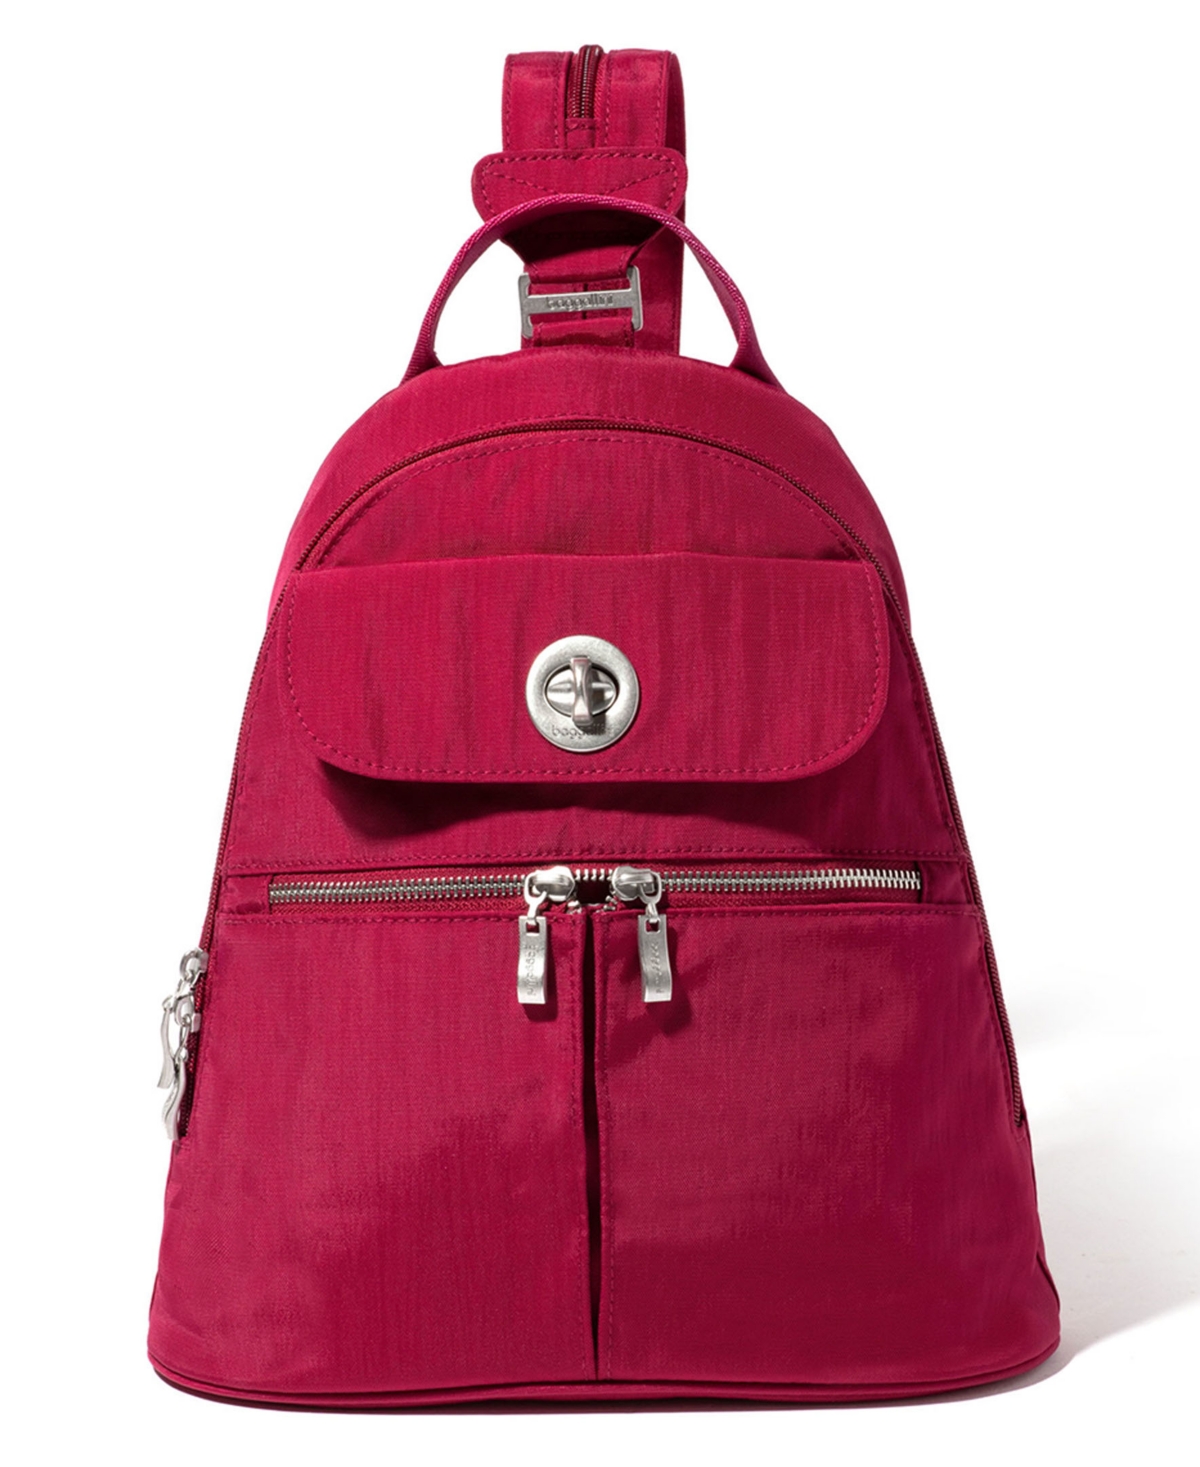 Naples Convertible Backpack - Beet Red